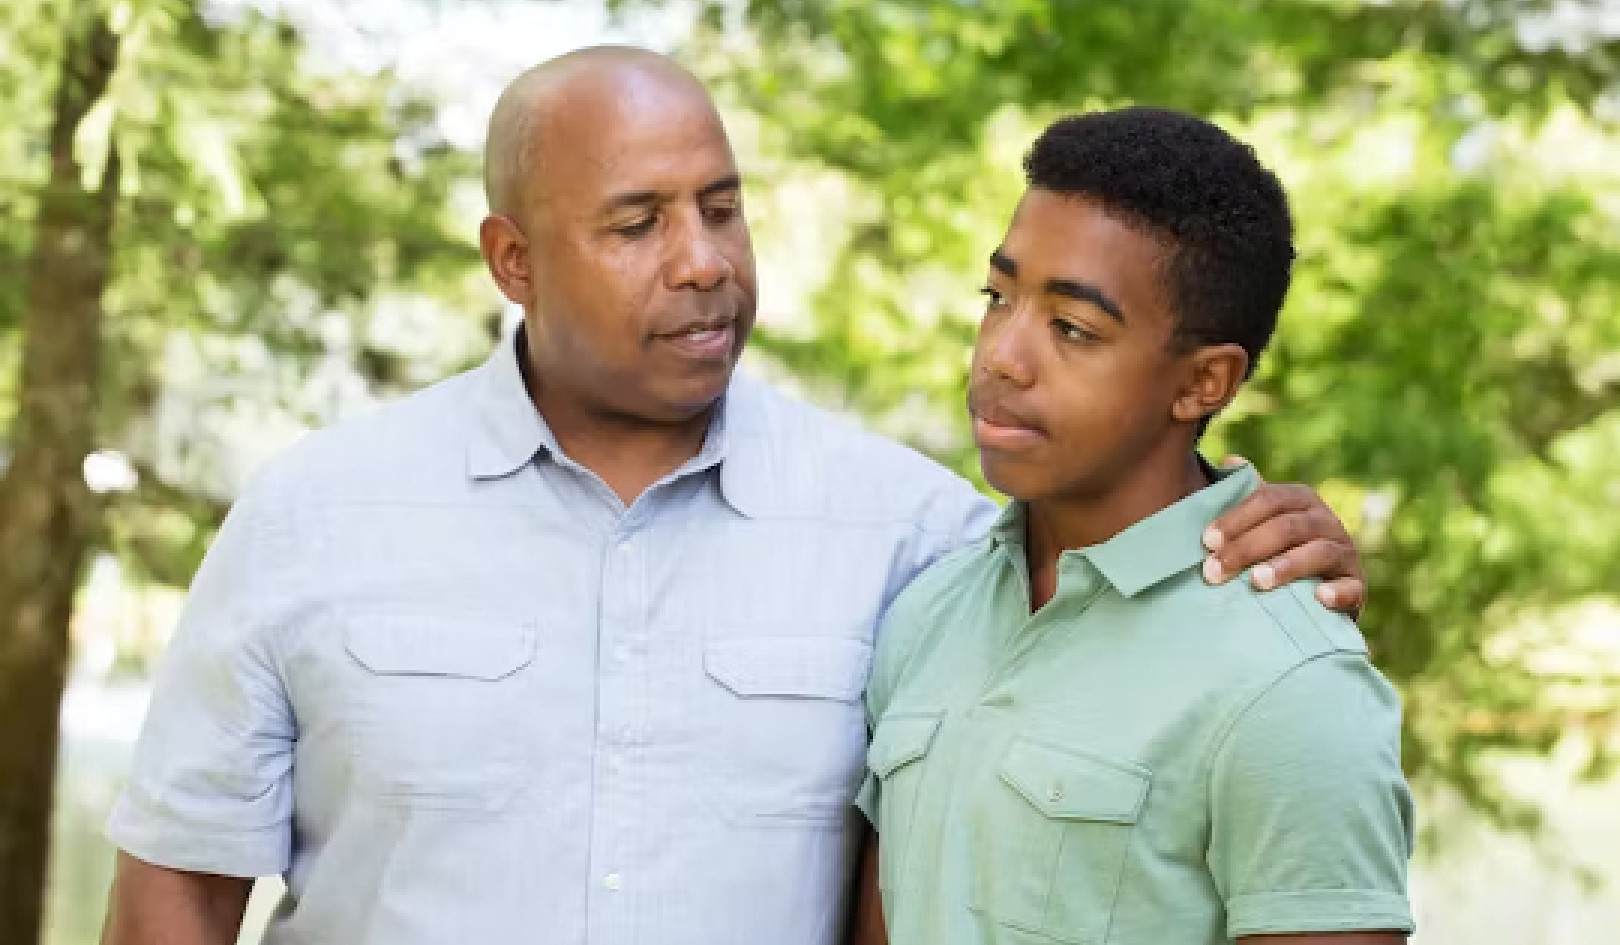 How to Have Difficult Conversations with Your Teenager